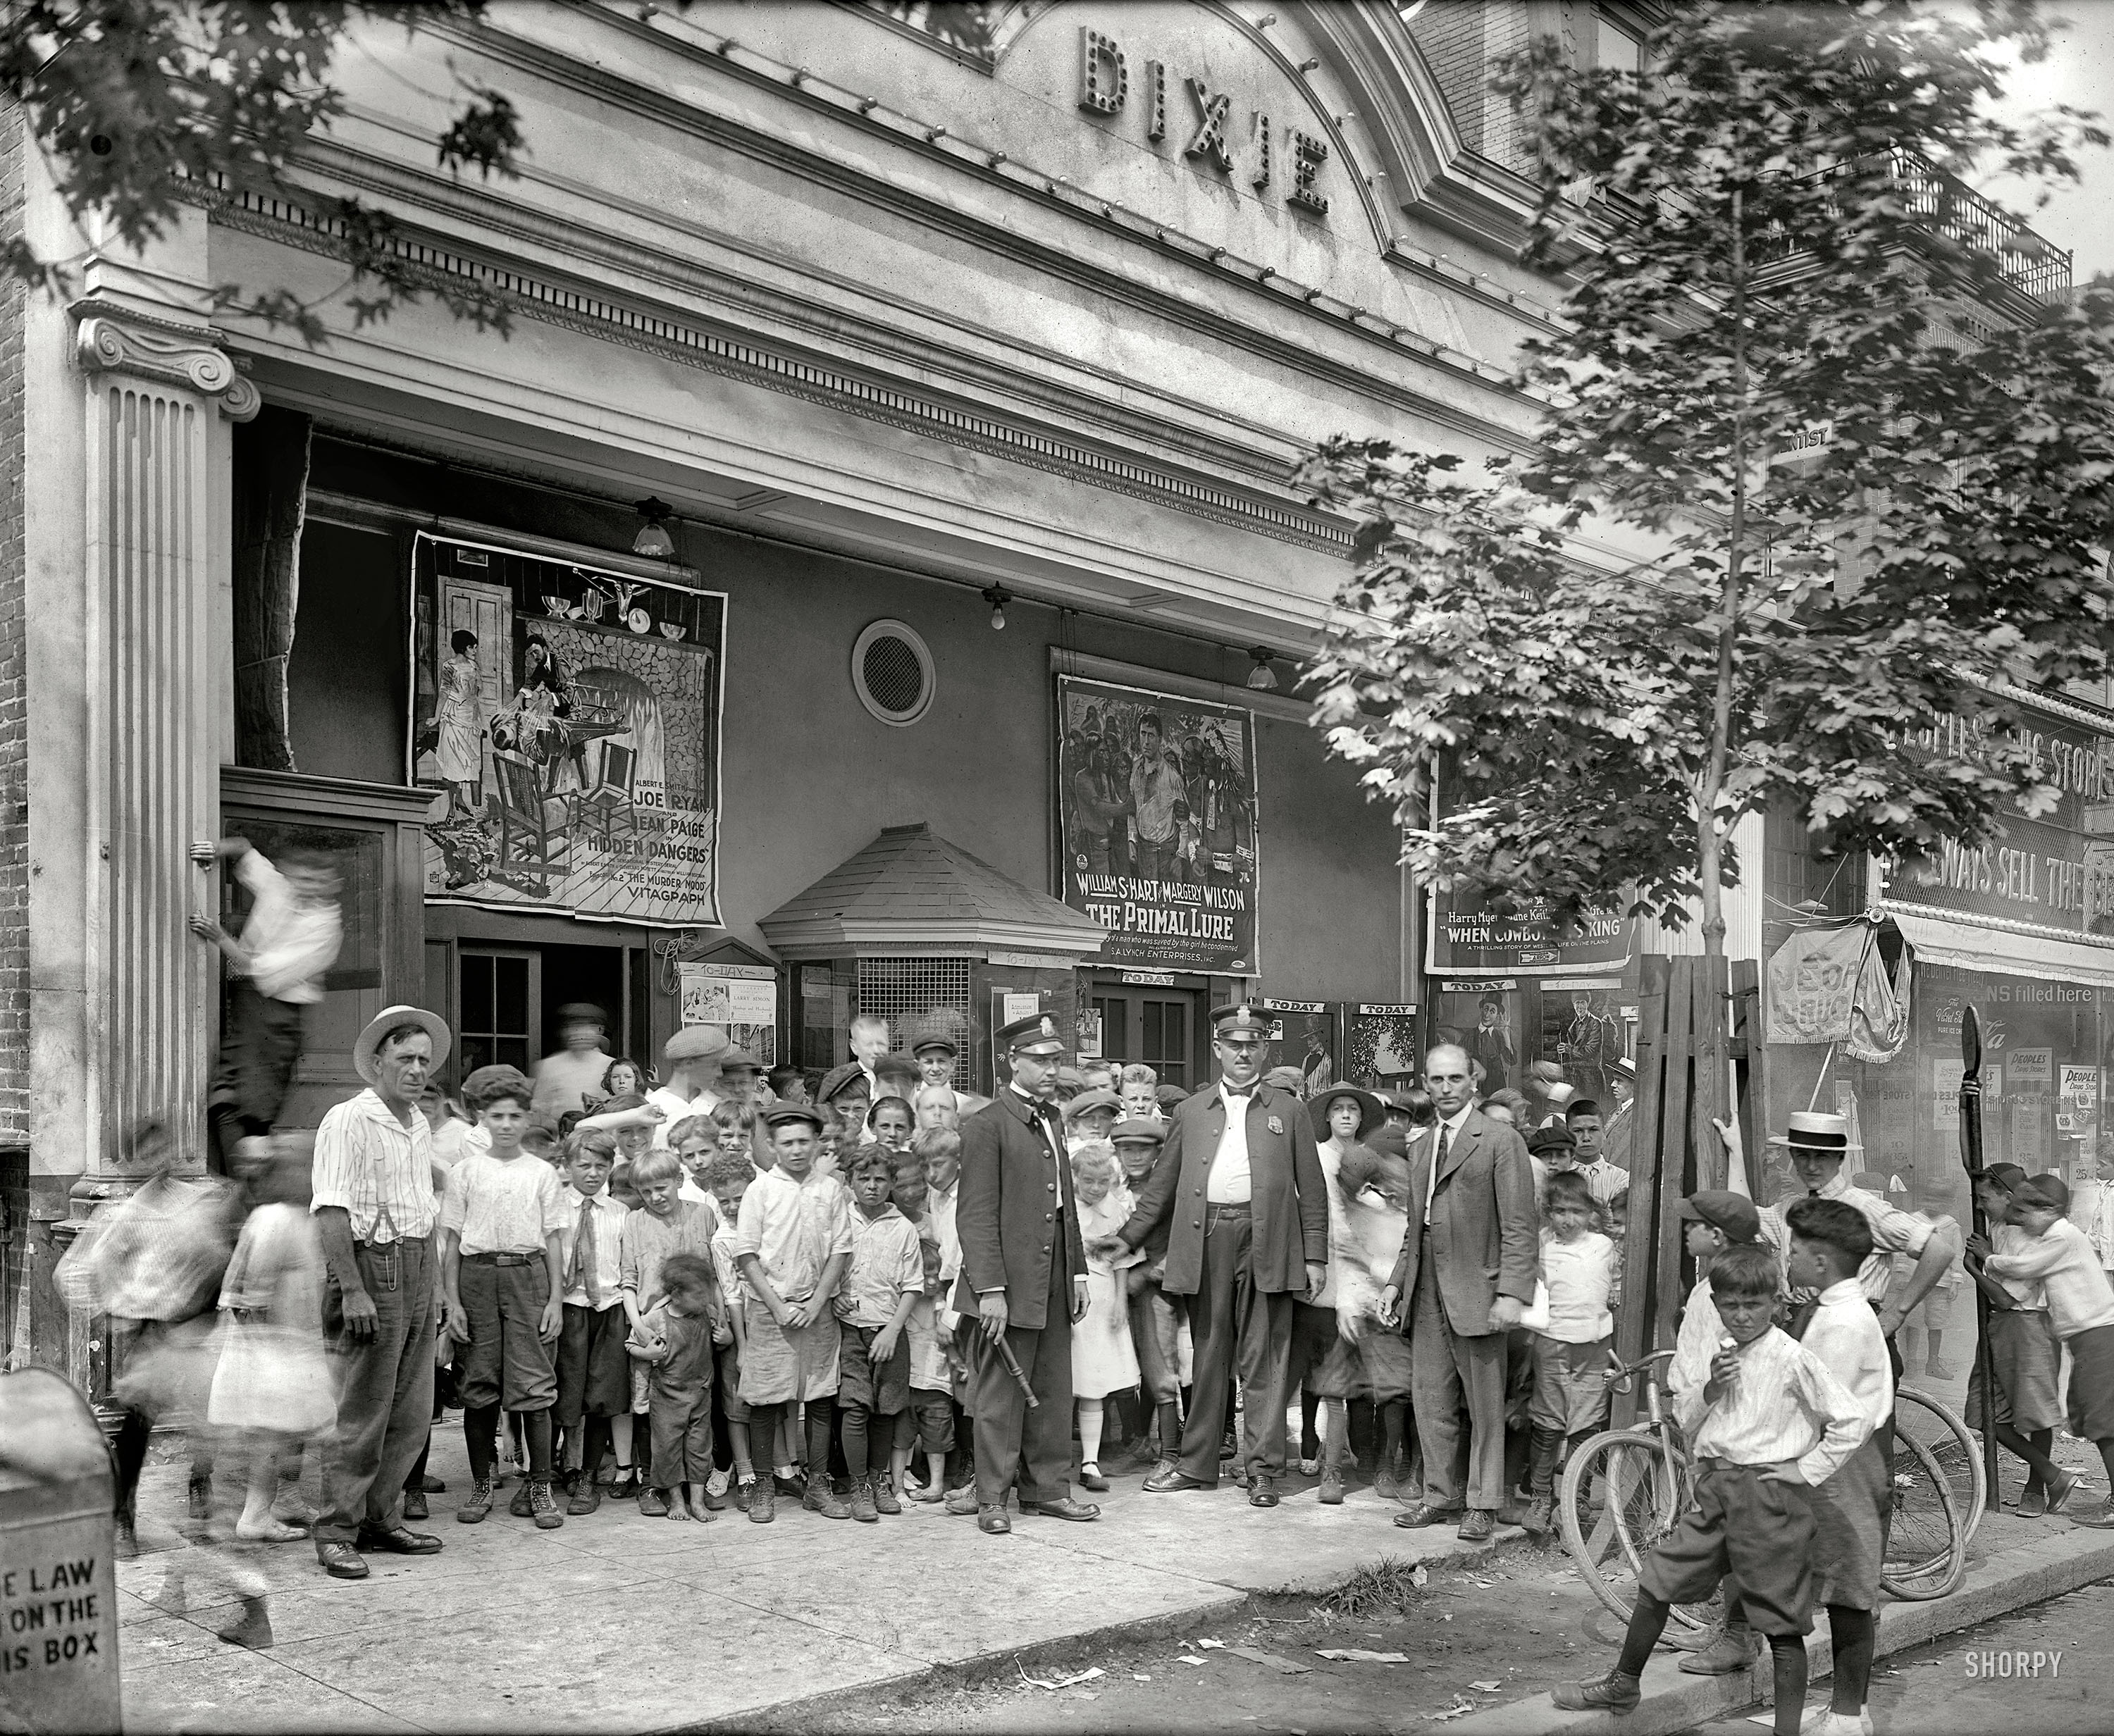 Washington, D.C., 1920. "Dixie Theater crowd, H Street." Now playing: "Hidden Dangers" (Episode 2, "The Murder Mood"), "The Primal Lure" and "When Cowboy Was King." Kids get in for 11 cents! Next door: People's Drug Store No. 5. National Photo Company Collection glass negative. View full size.